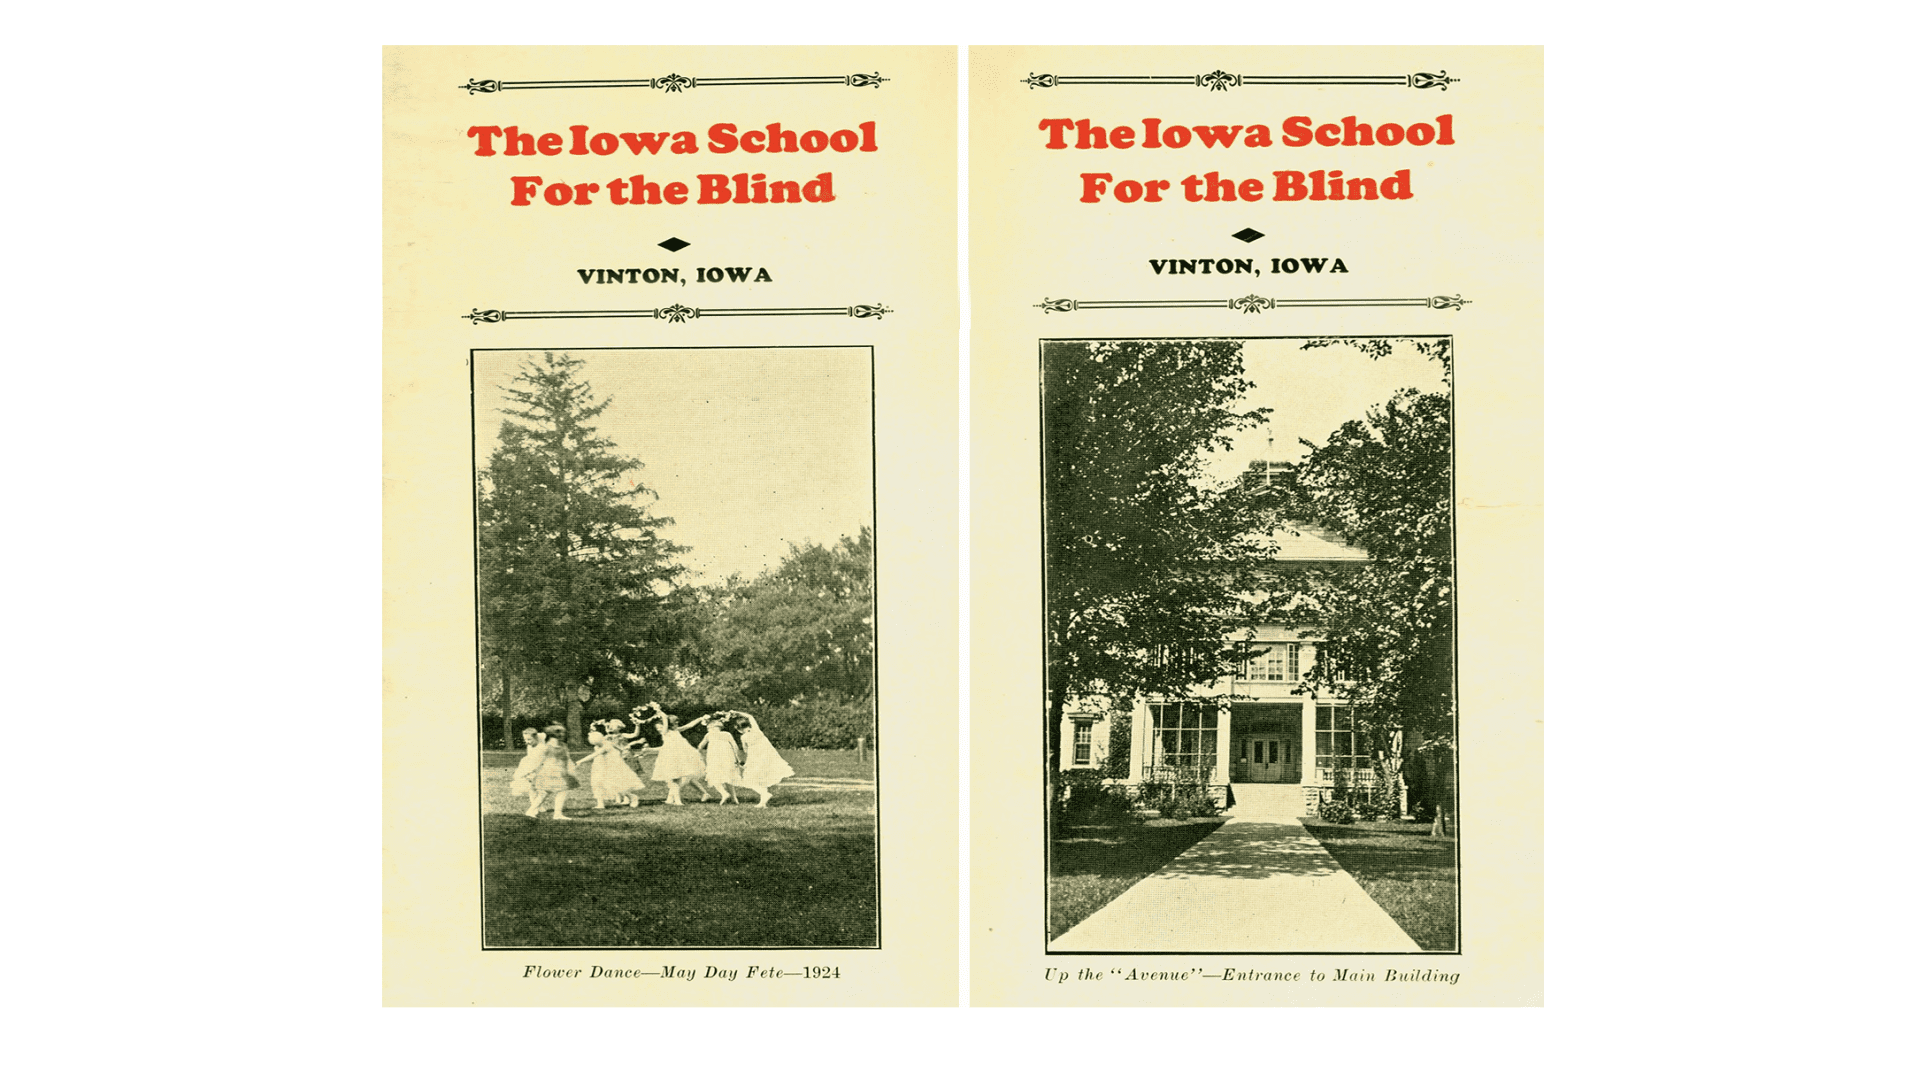 The covers of two brochures for the Iowa School for the Blind in Vinton, Iowa. The picture on one brochure depicts a group of young girls, holding hands and dancing in a circle. They are all dressed in white and have flowers in their hair. A caption reads, ”Flower Girls Dance – May Day fete – 1924." The other brochure shows the front entryway to the Iowa School. Its caption reads, “Up the ‘Avenue’ – Entrance to Main Building."